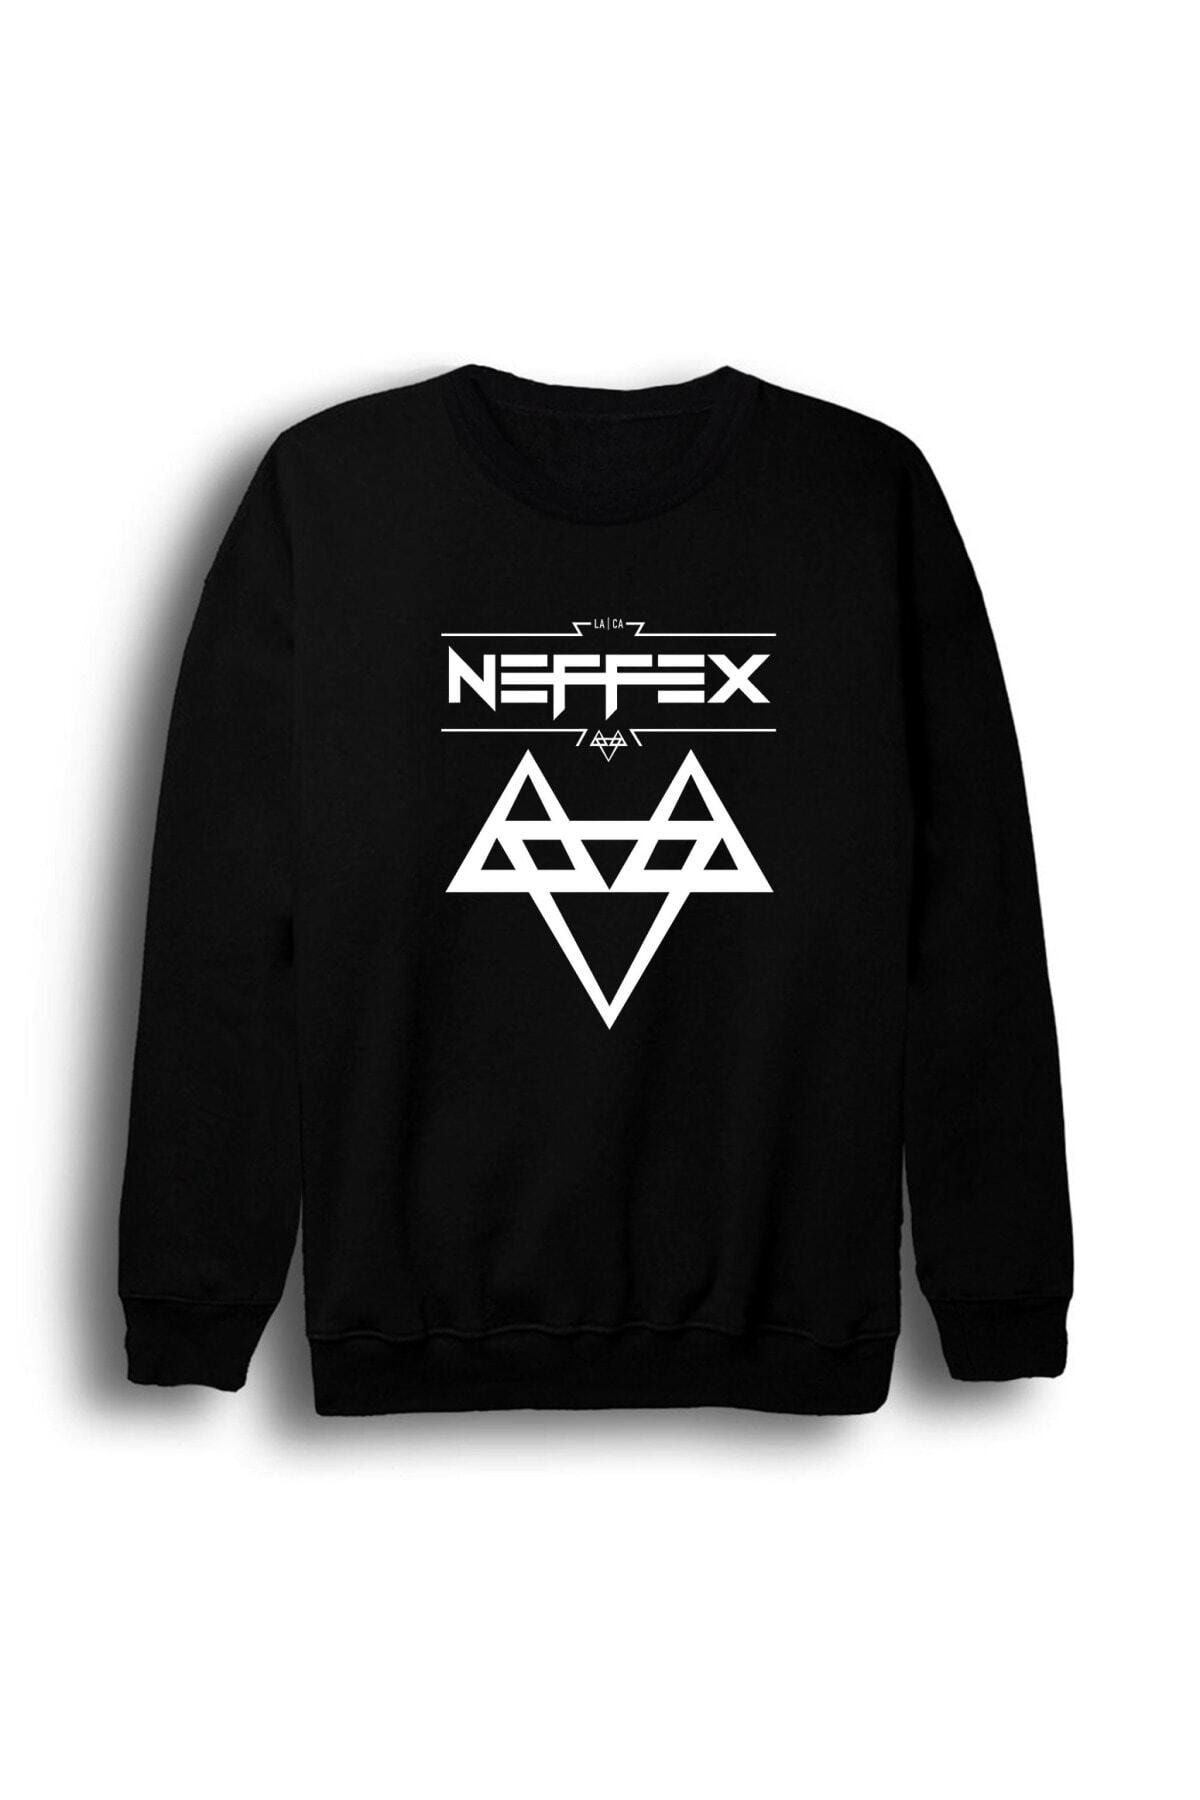 Neffex Projects :: Photos, videos, logos, illustrations and branding ::  Behance